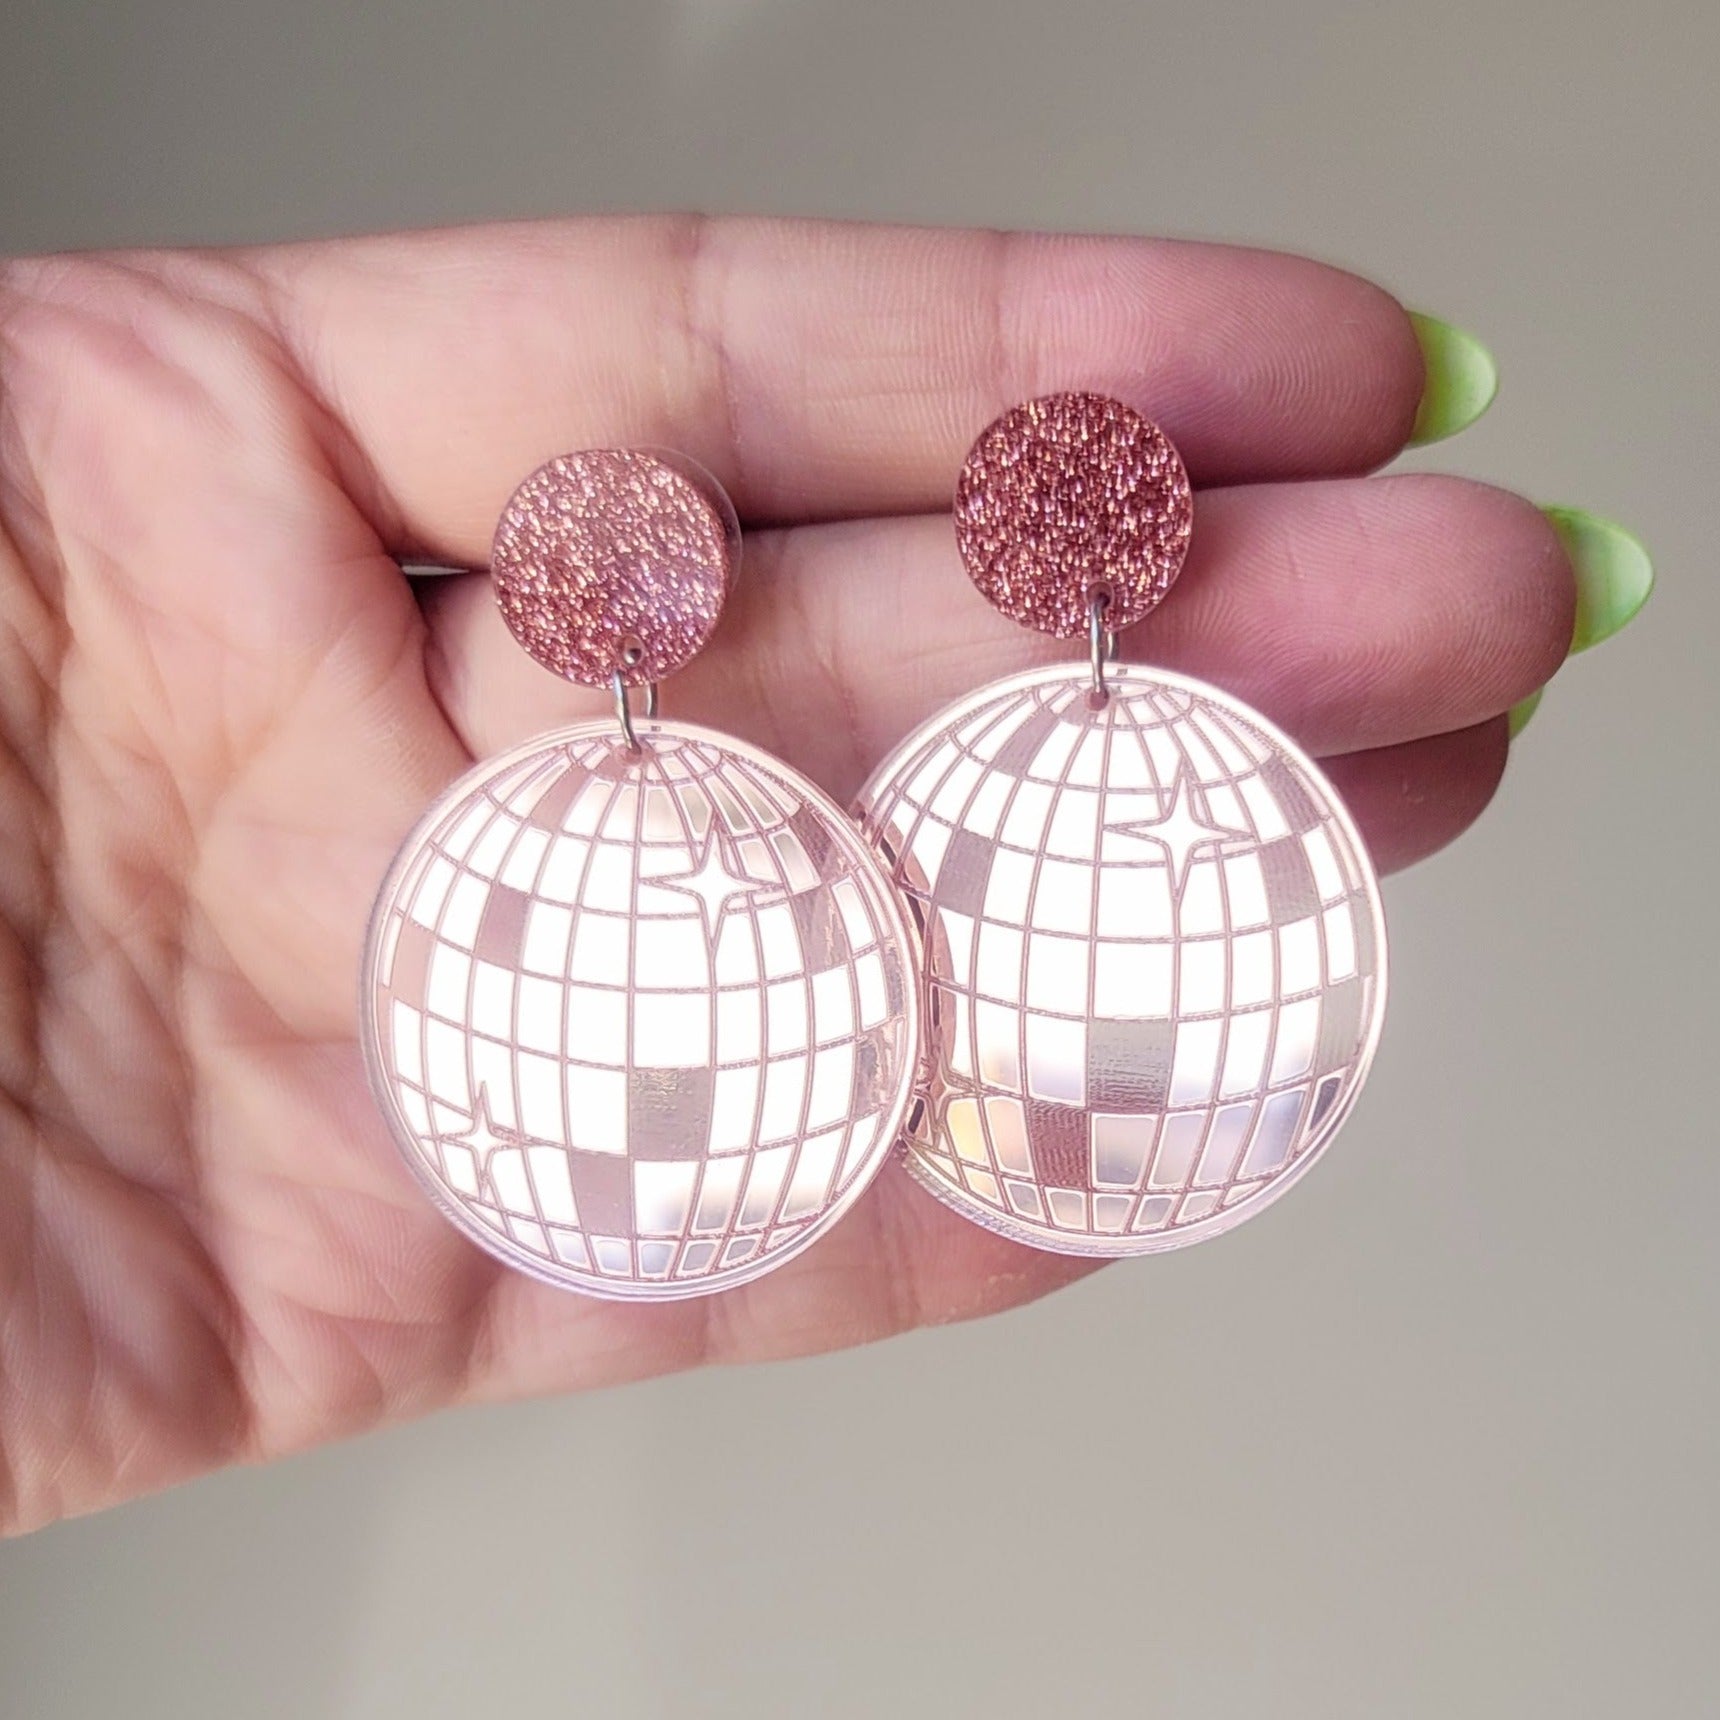 70s Pink Purple and Groovy Disco Ball Earrings  Relic828